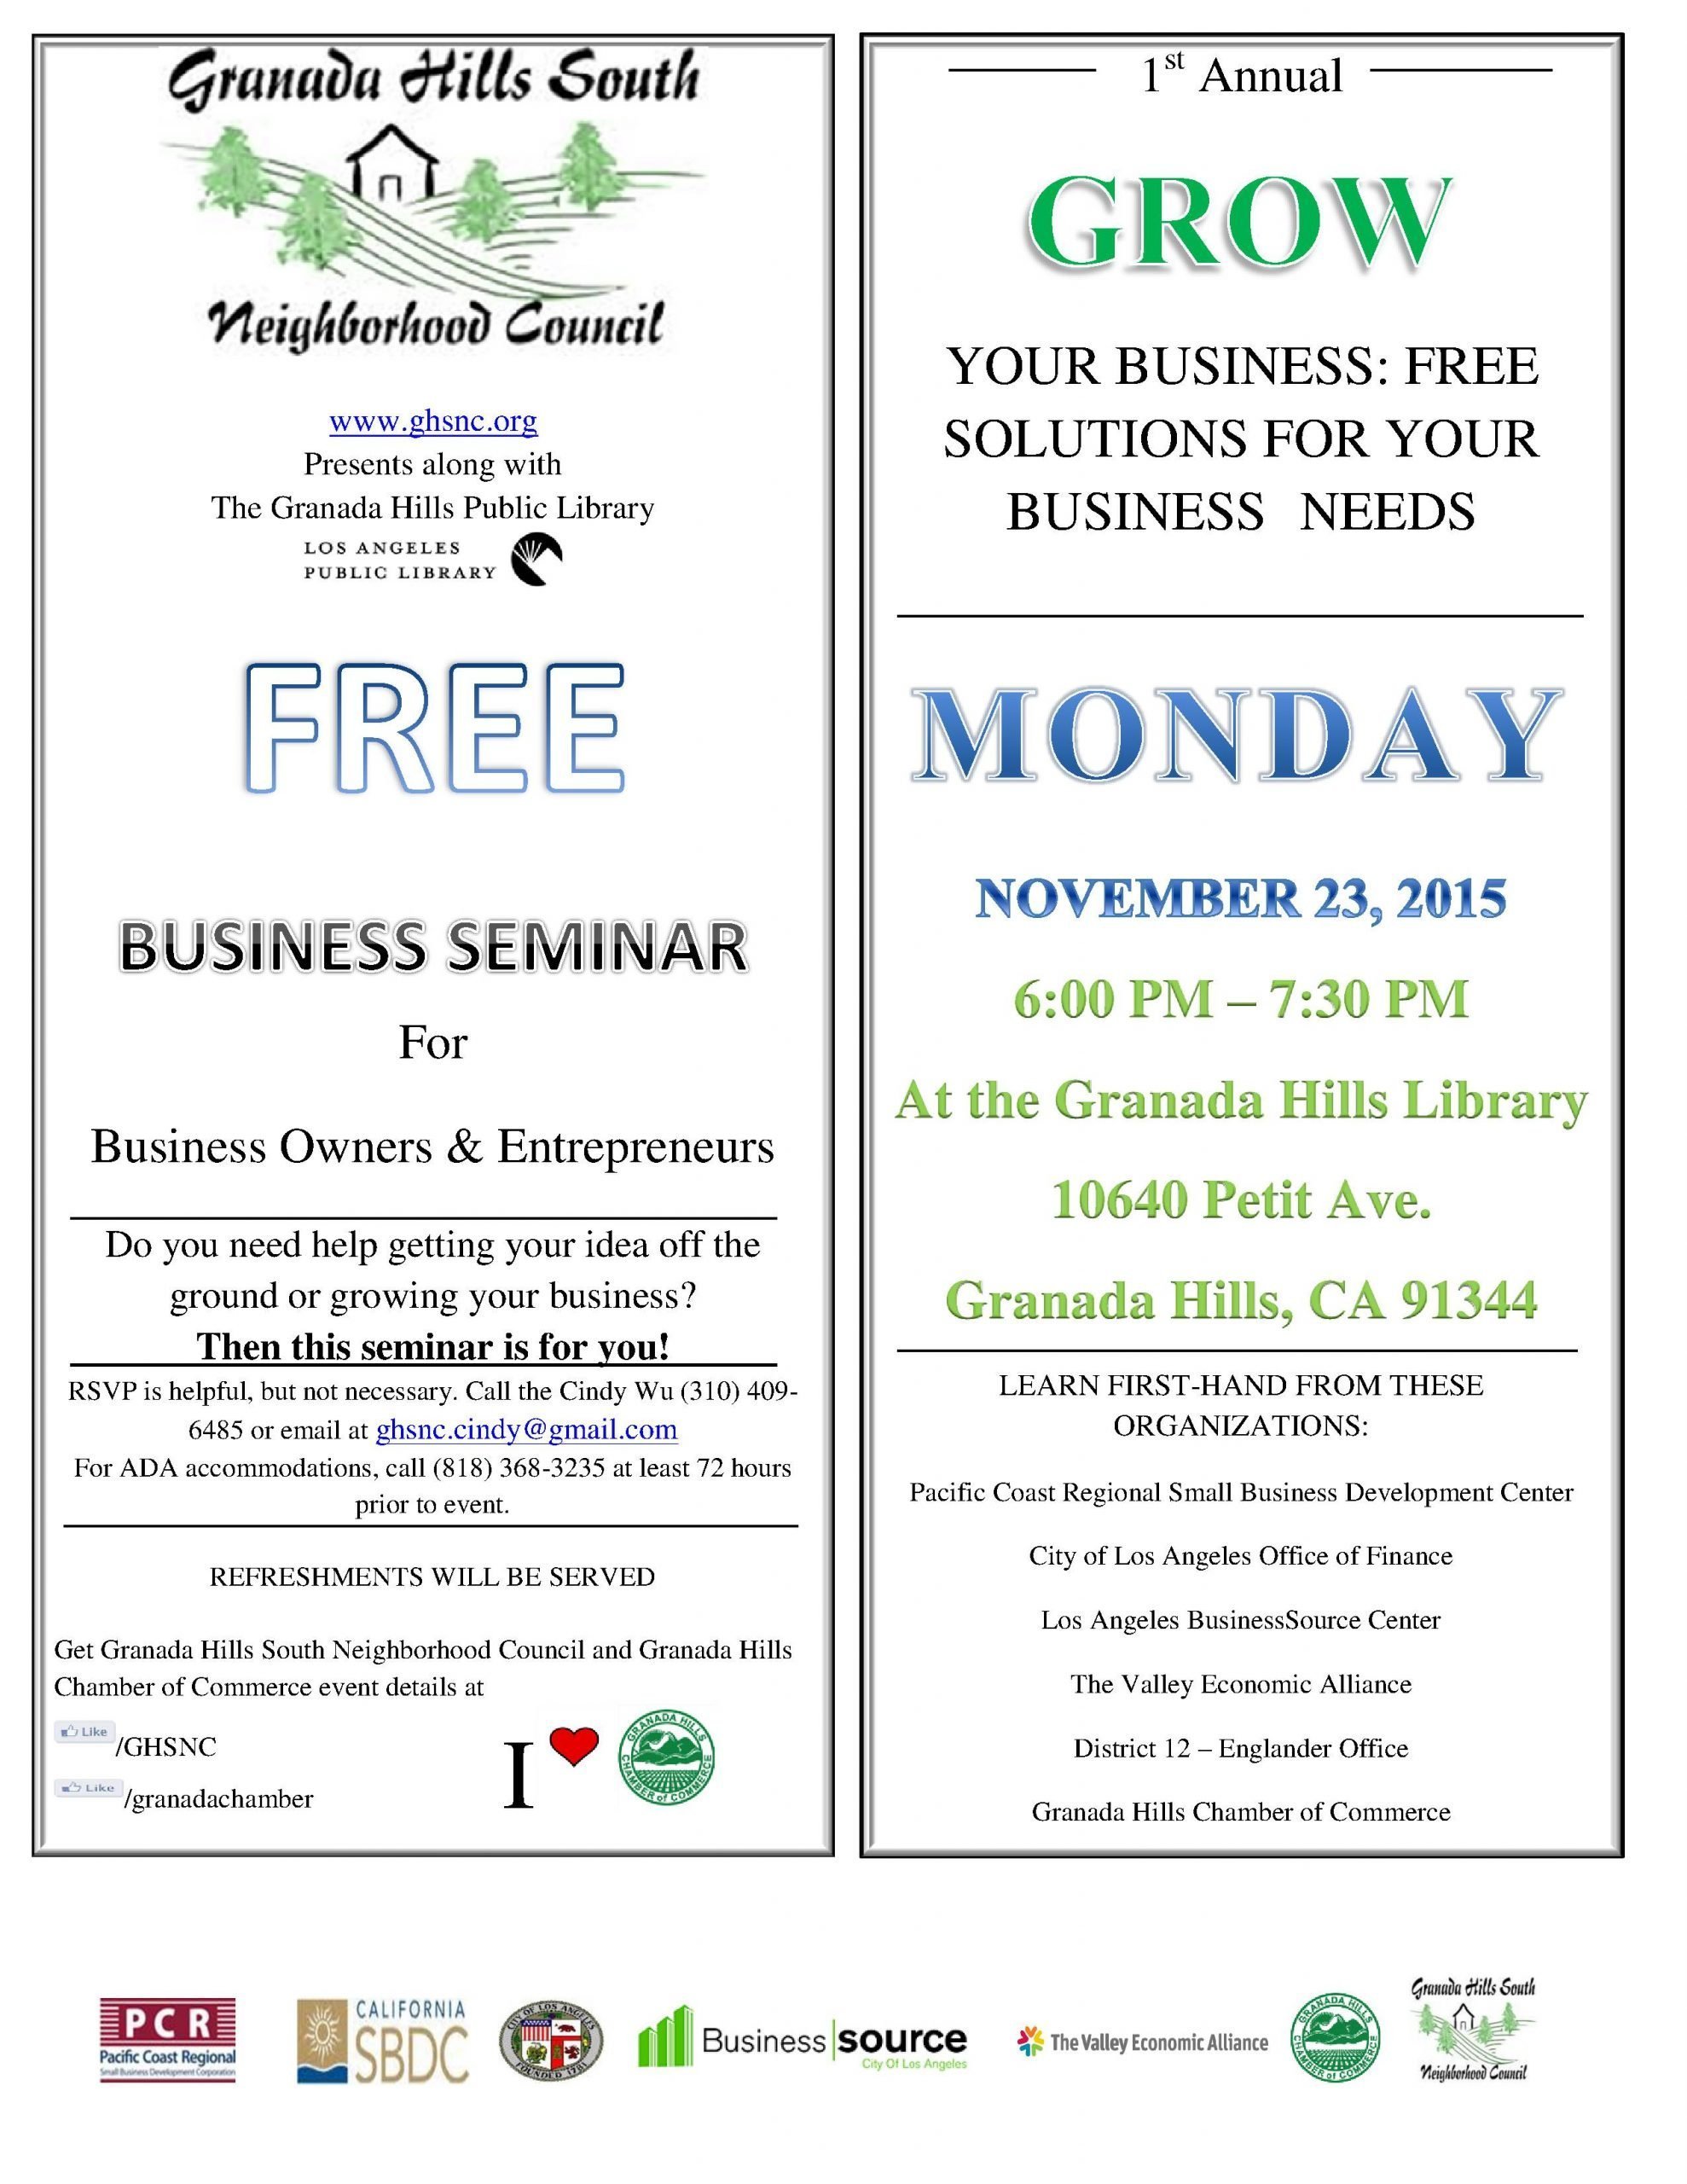 Business Seminar: How to Grow Your Business or Get Your Ideas Off the Ground